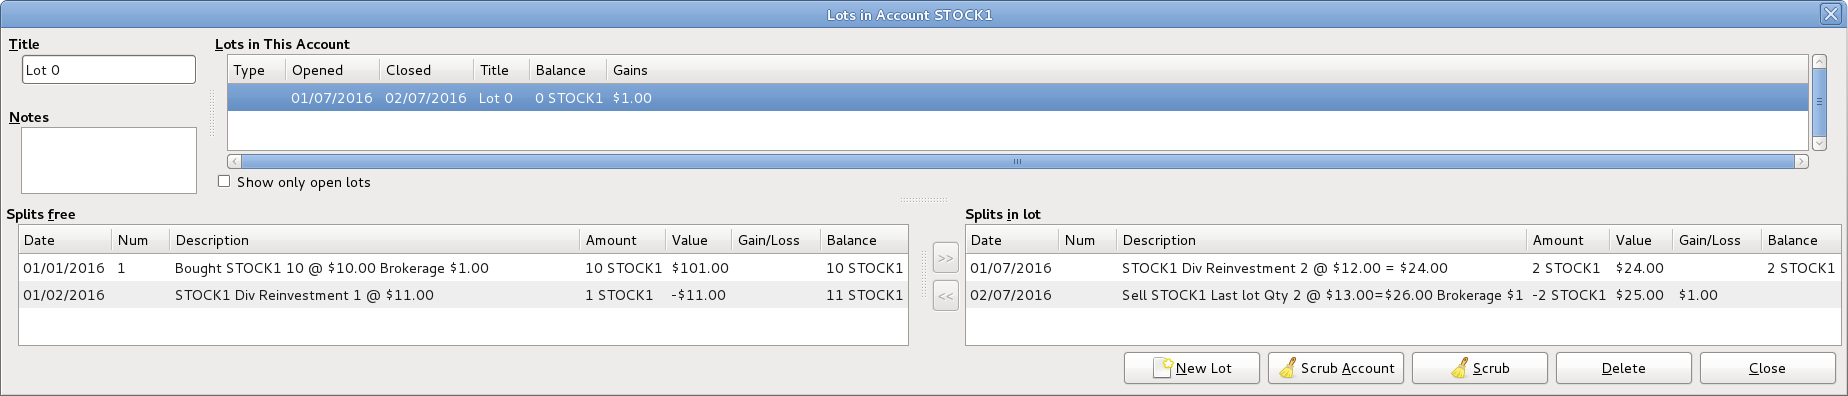 Example of Lots in Account window before scrubbing a single lot